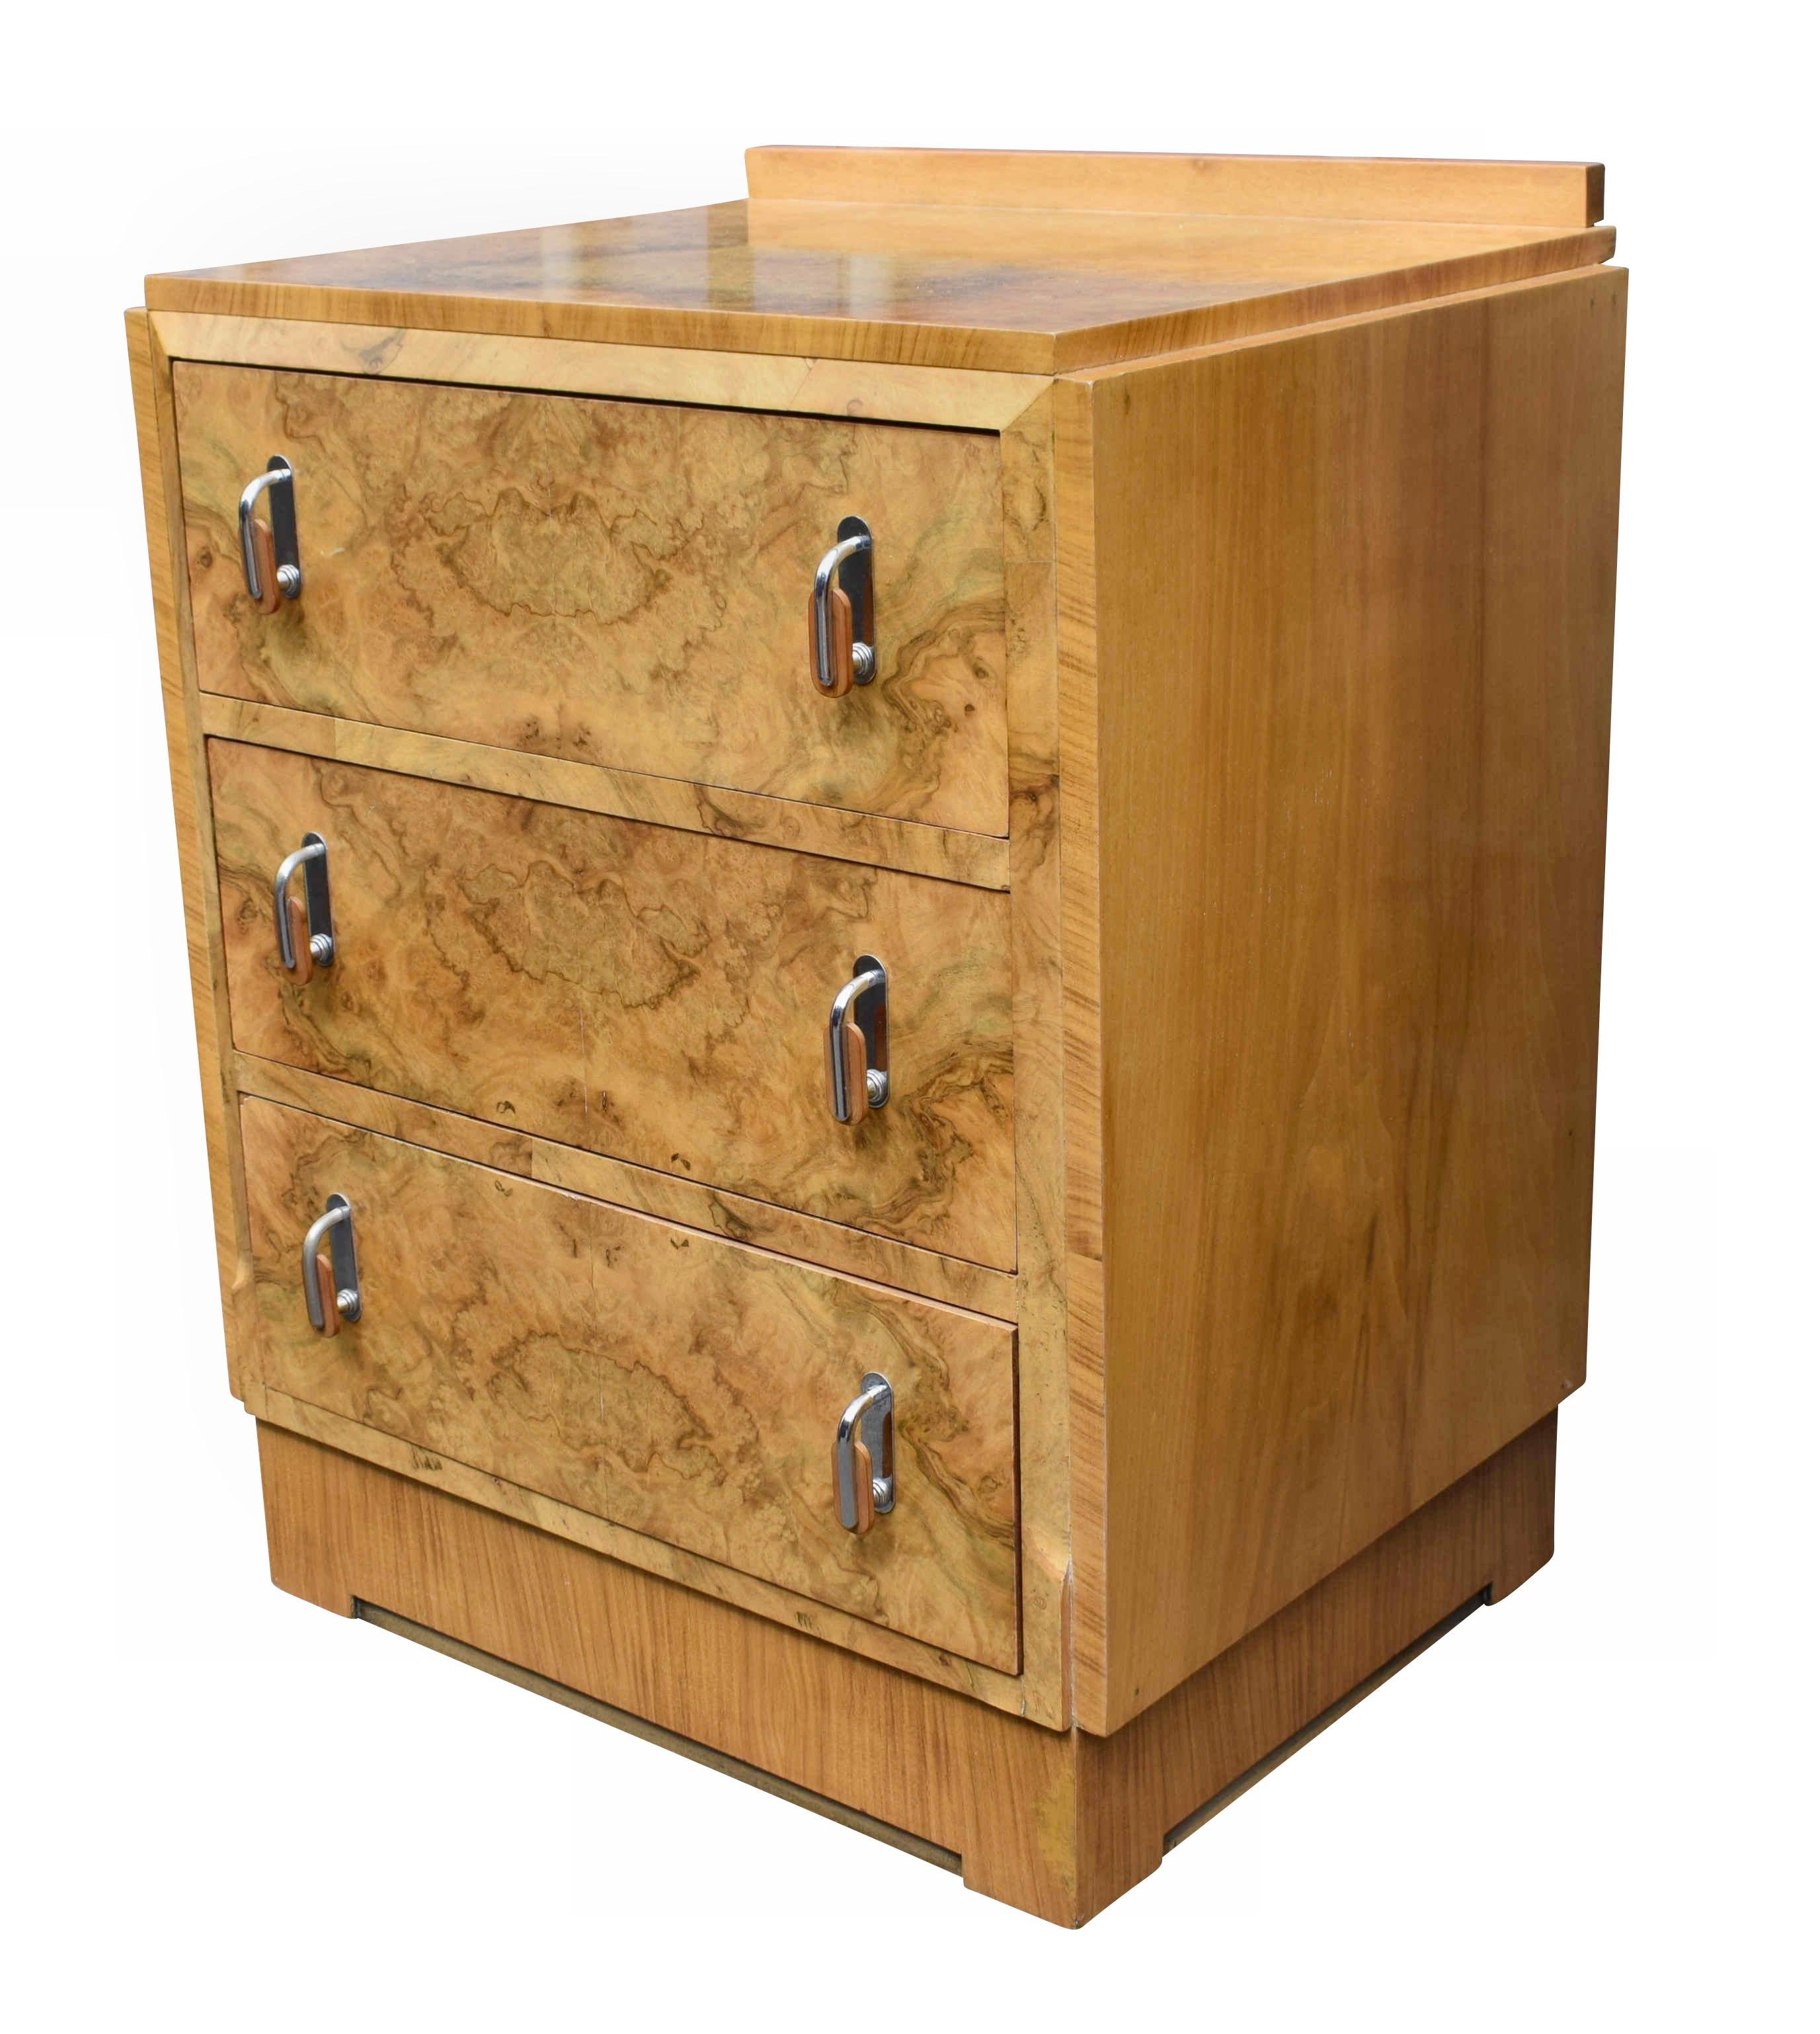 Superbly stylish 1930s Art Deco bleached blonde walnut chest of three drawers. Rare bleached blonde walnut veneers with a beautifully detailed pattern and grain. You can sense the quality in this piece immediately, from the timbers used to the Fine